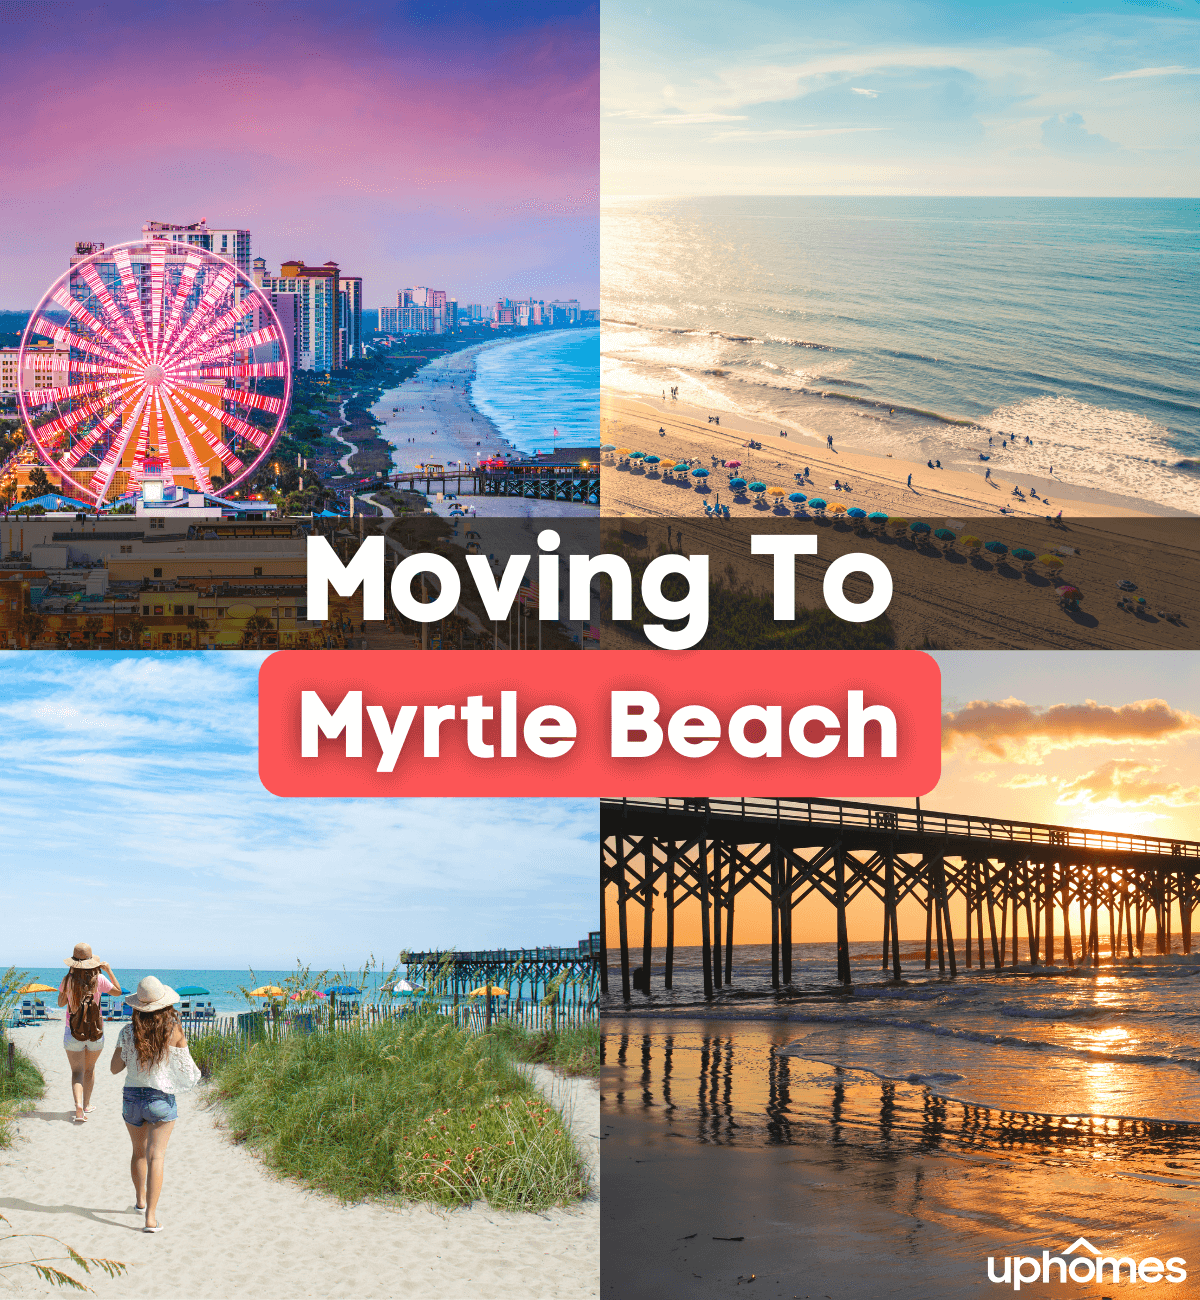 Moving to Myrtle Beach, SC - What is life like living in Myrtle Beach, SC?